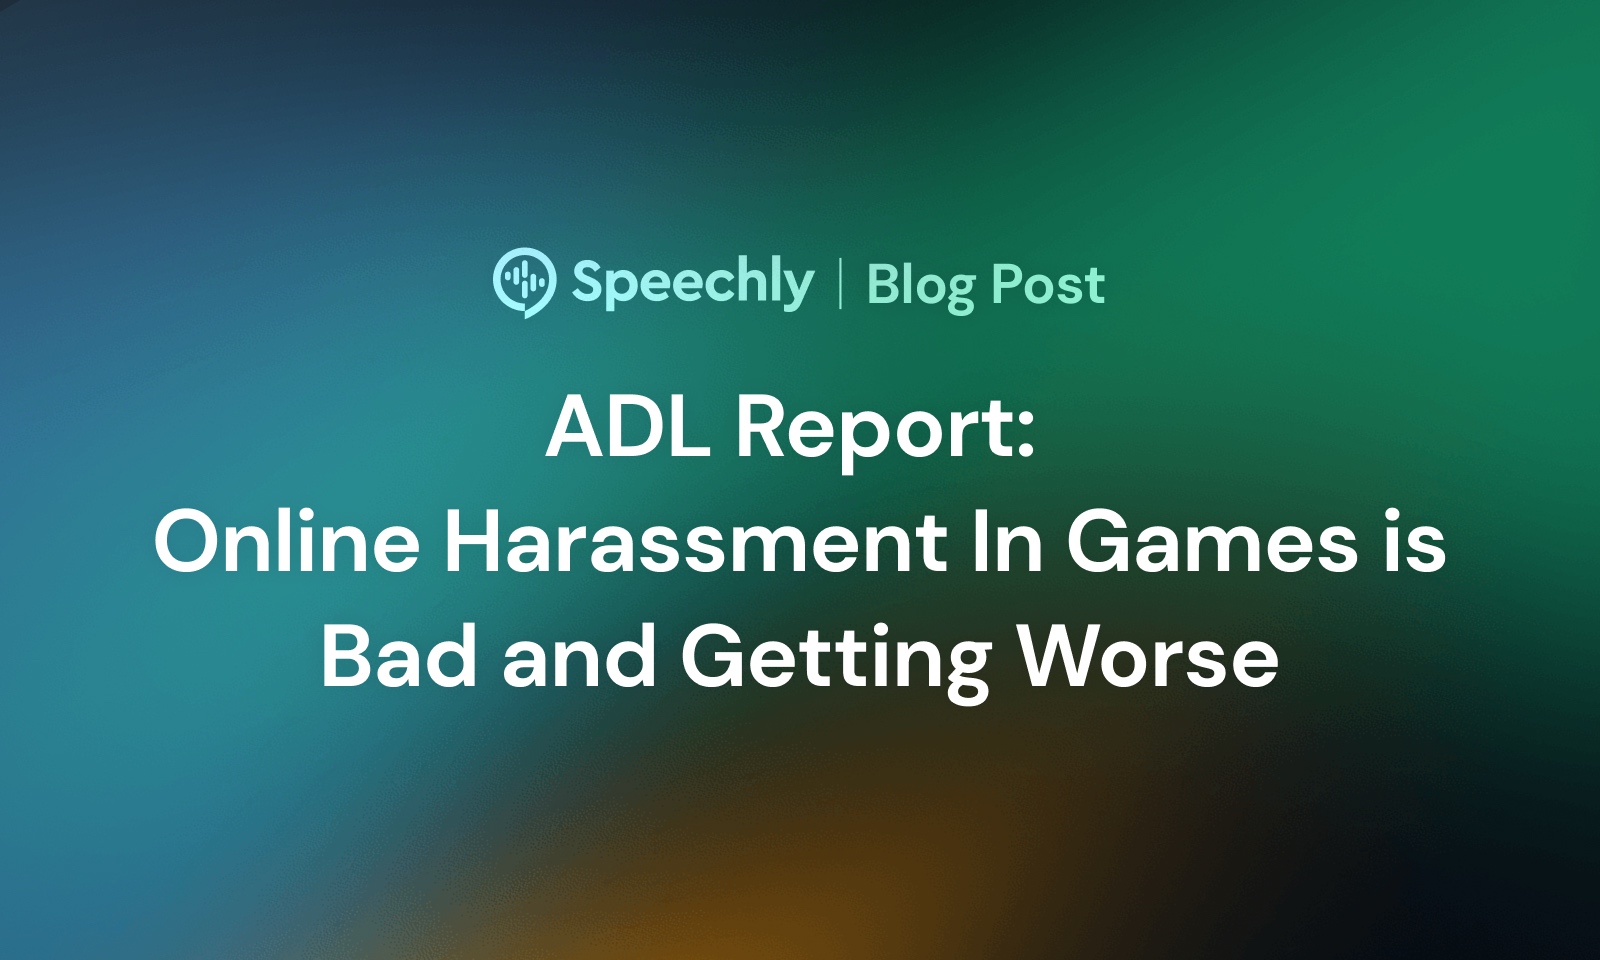 Adl Report Online Harassment In Games Is Bad And Getting Worse Speechly